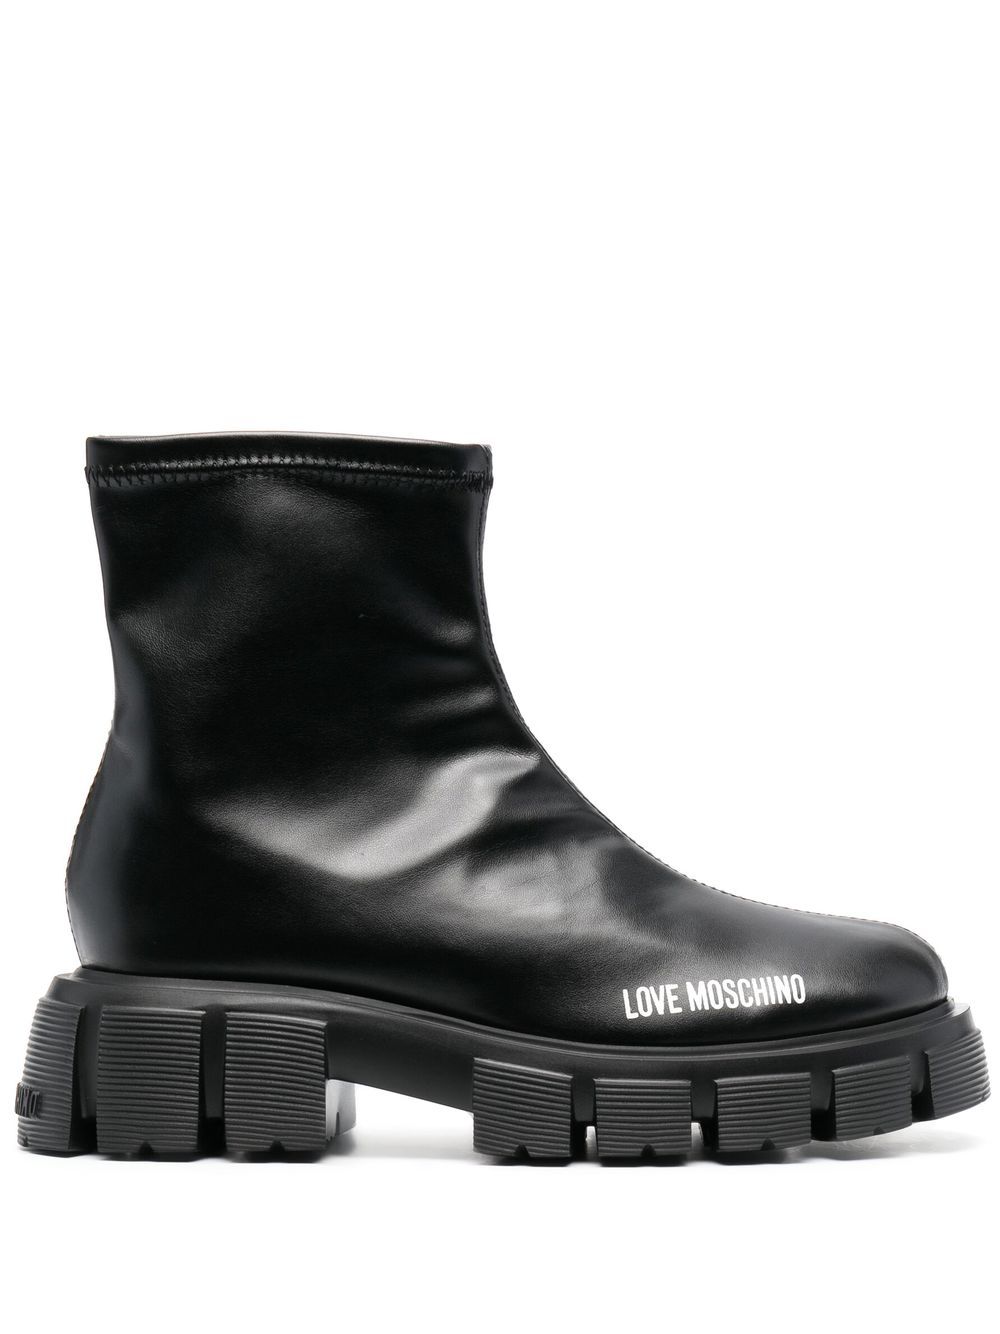 Love Moschino 50mm logo-print studded sole boots - Black